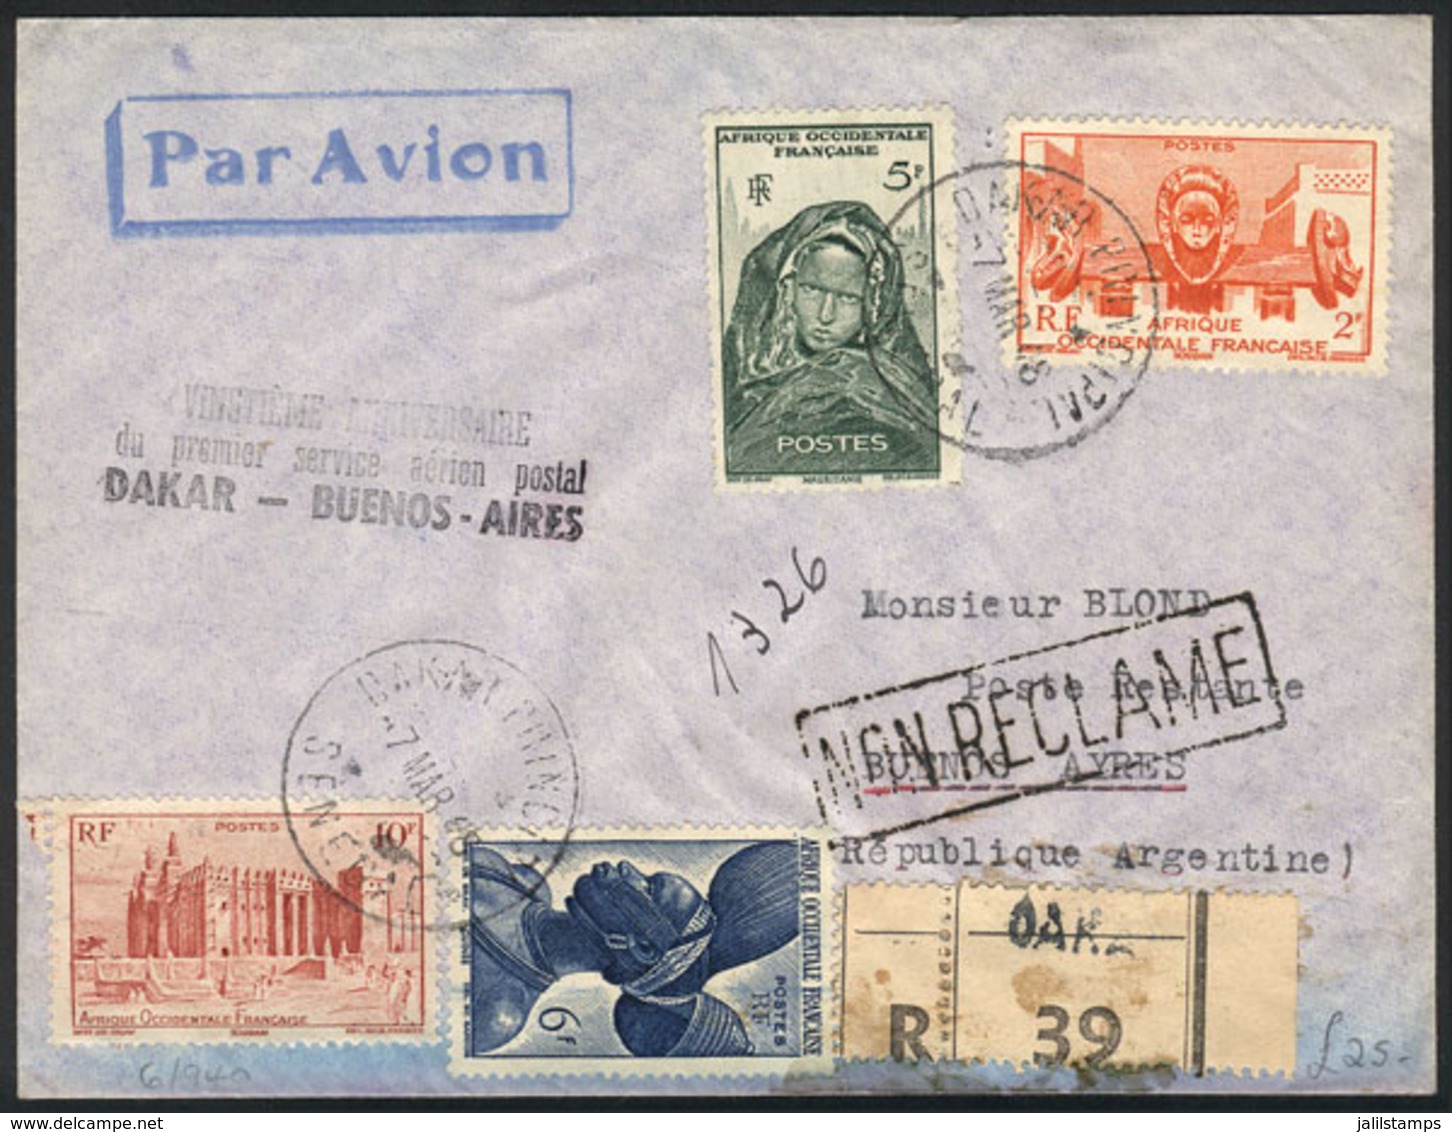 SENEGAL: 7/MAR/1948 Dakar - Buenos Aires: Registered Cover With Special Handstamp Commemorating The 20th Anniversary Of  - Senegal (1960-...)